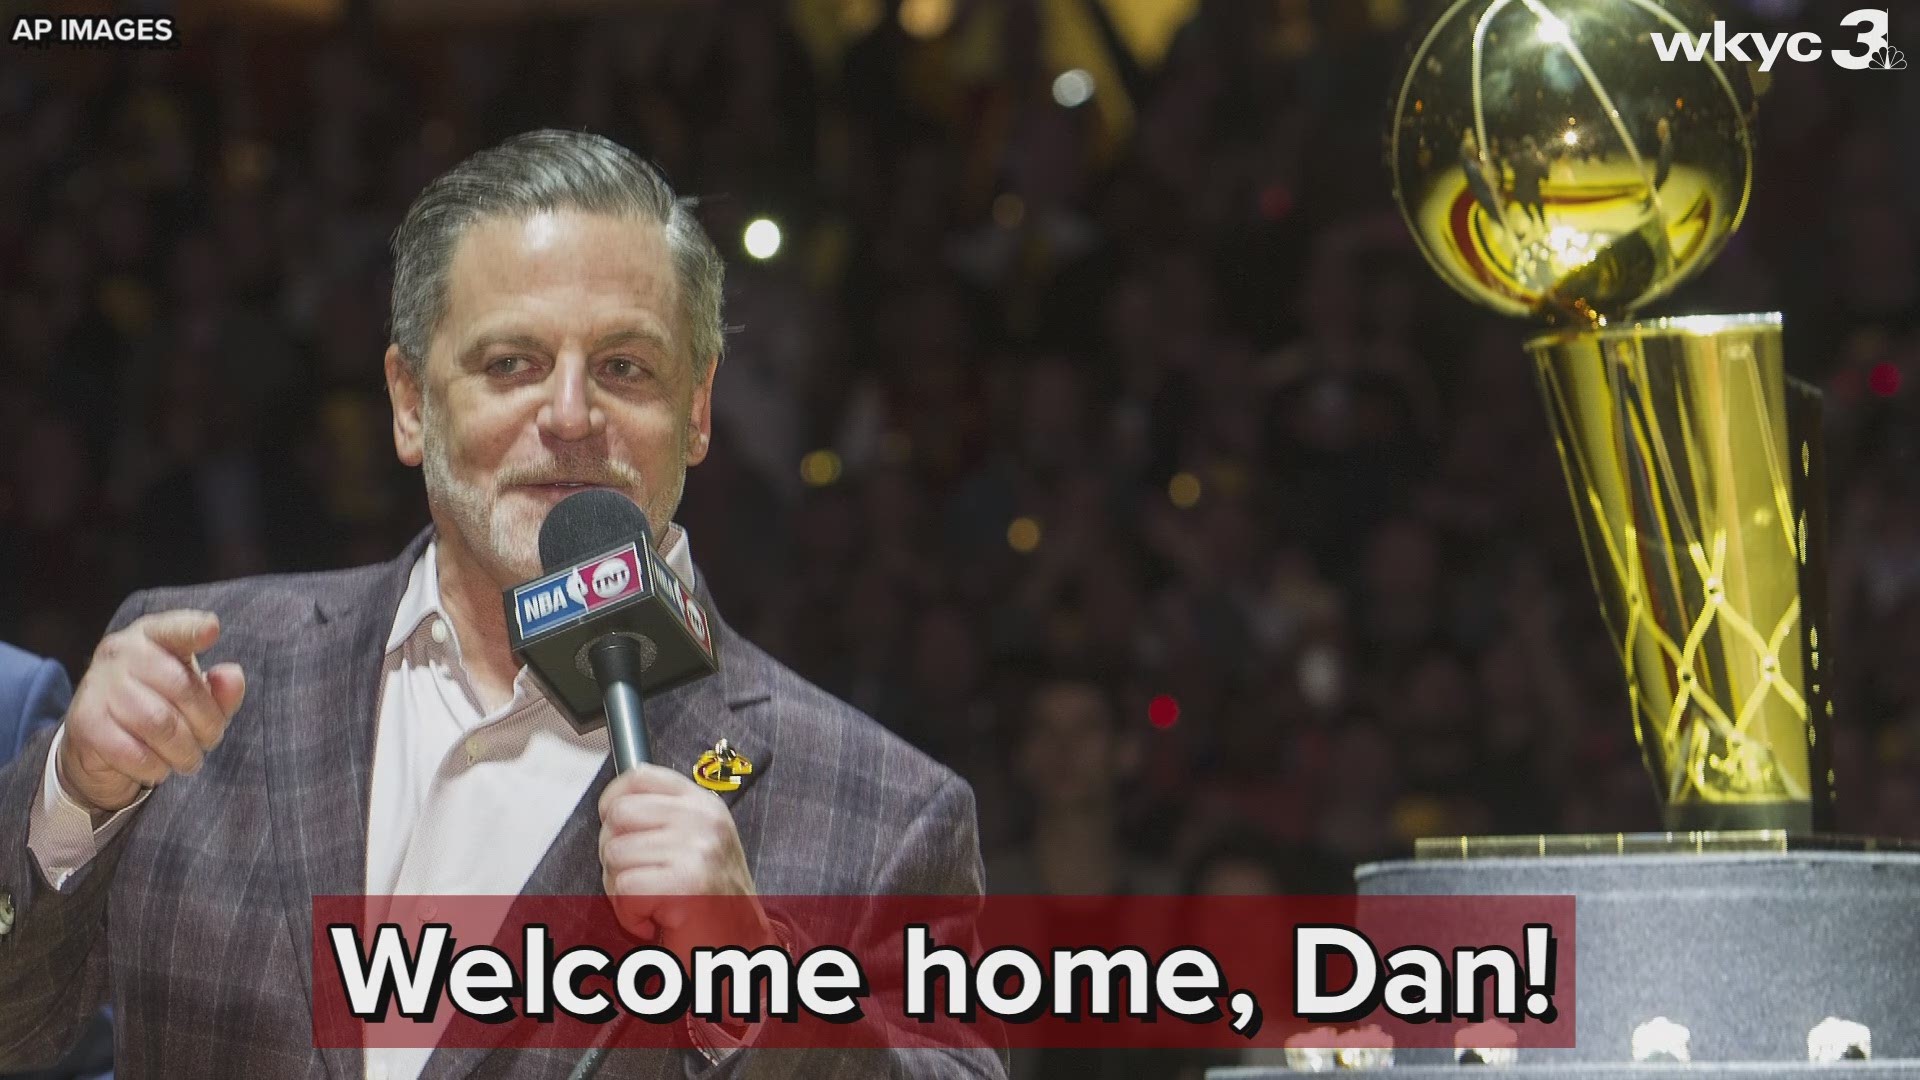 Quicken Loans announced on Tuesday that Cleveland Cavaliers owner Dan Gilbert has returned to Detroit after eight weeks in a Chicago rehab center.